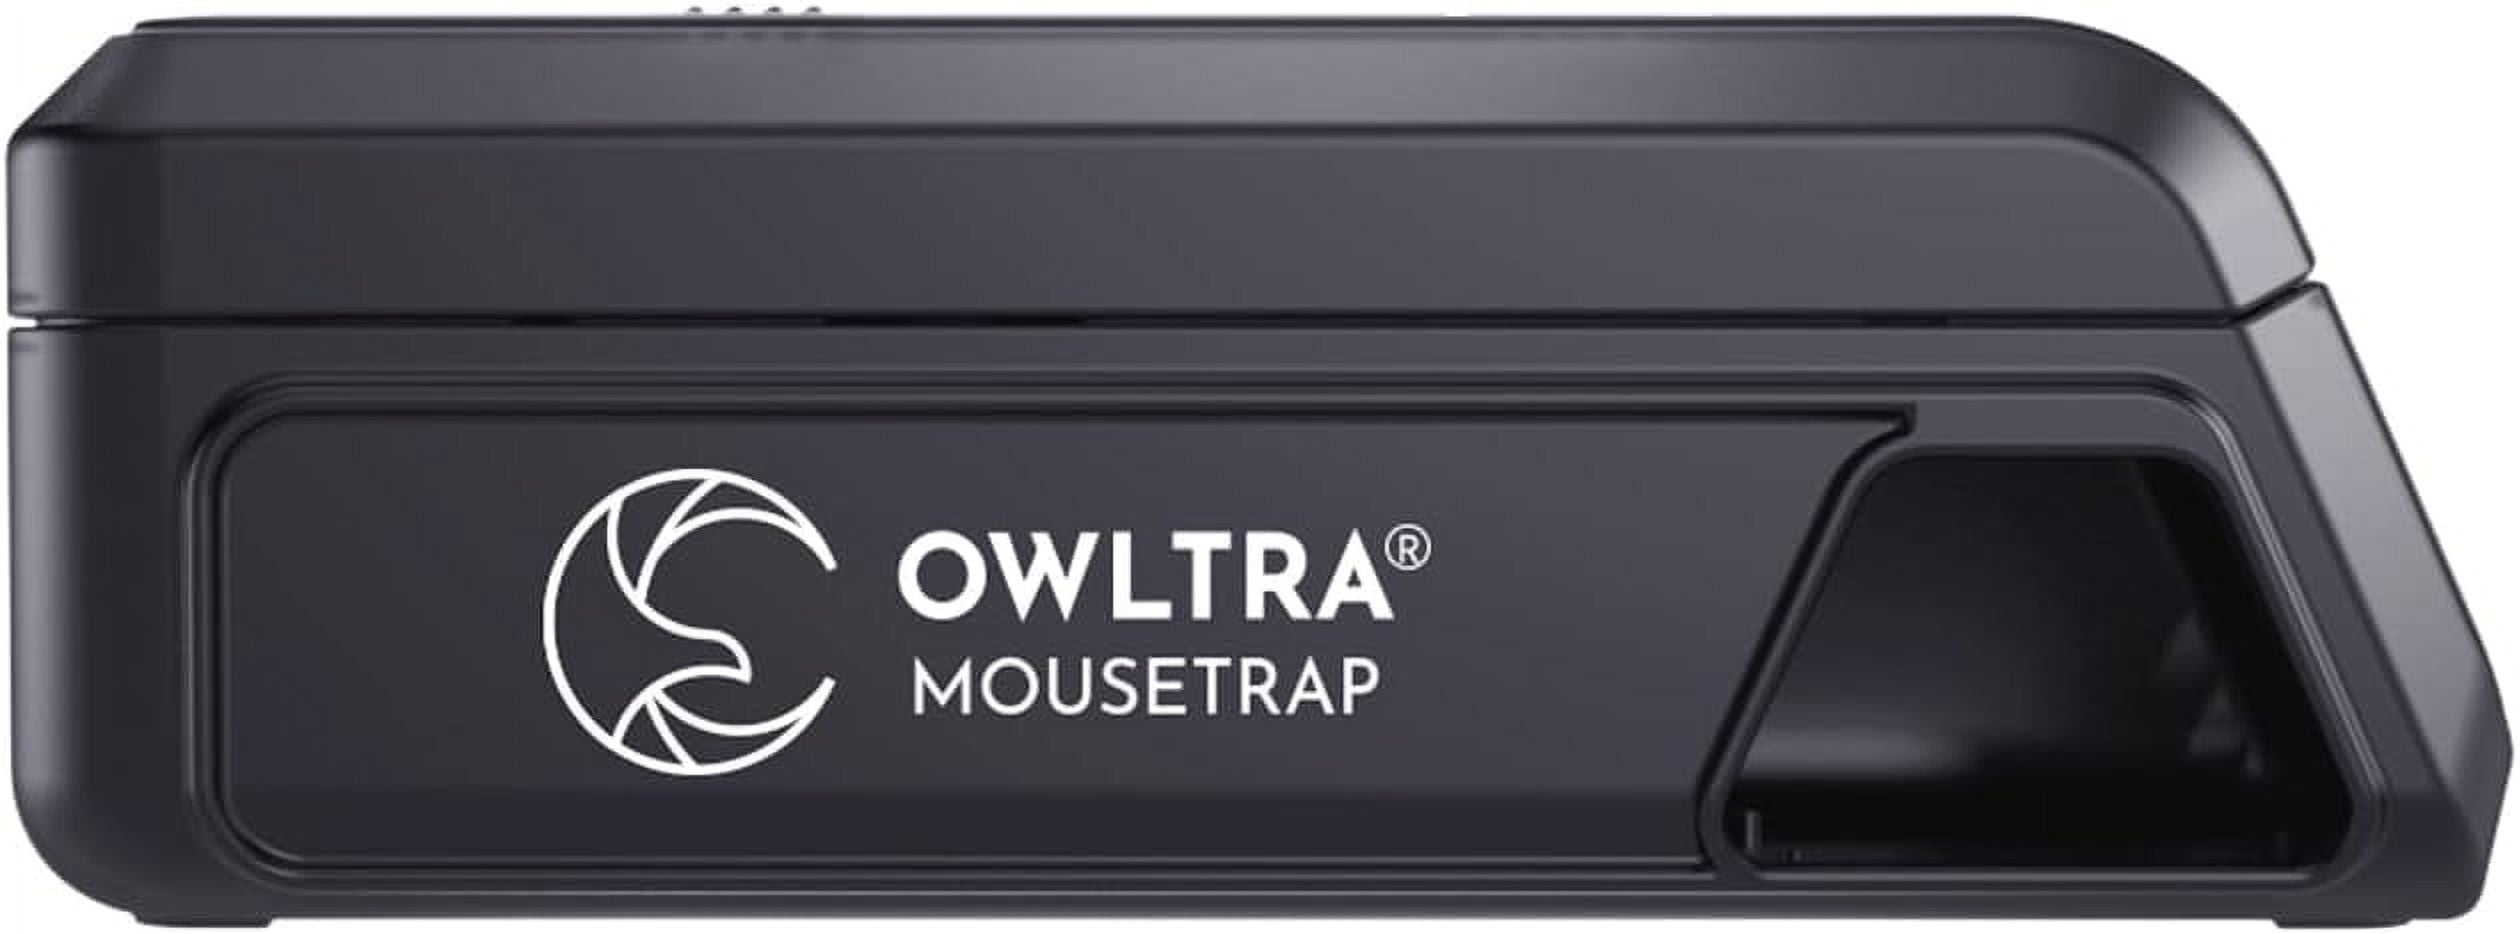  OWLTRA 2 Pack OW-7 in-/Outdoor Electric Rodent Trap, Instant  Kill Mouse & Rat Zapper with Waterproof Cover, Sound & Light Alarm, and  Batteries or USB Power Source, Waterproof Grade IPX4, Black 